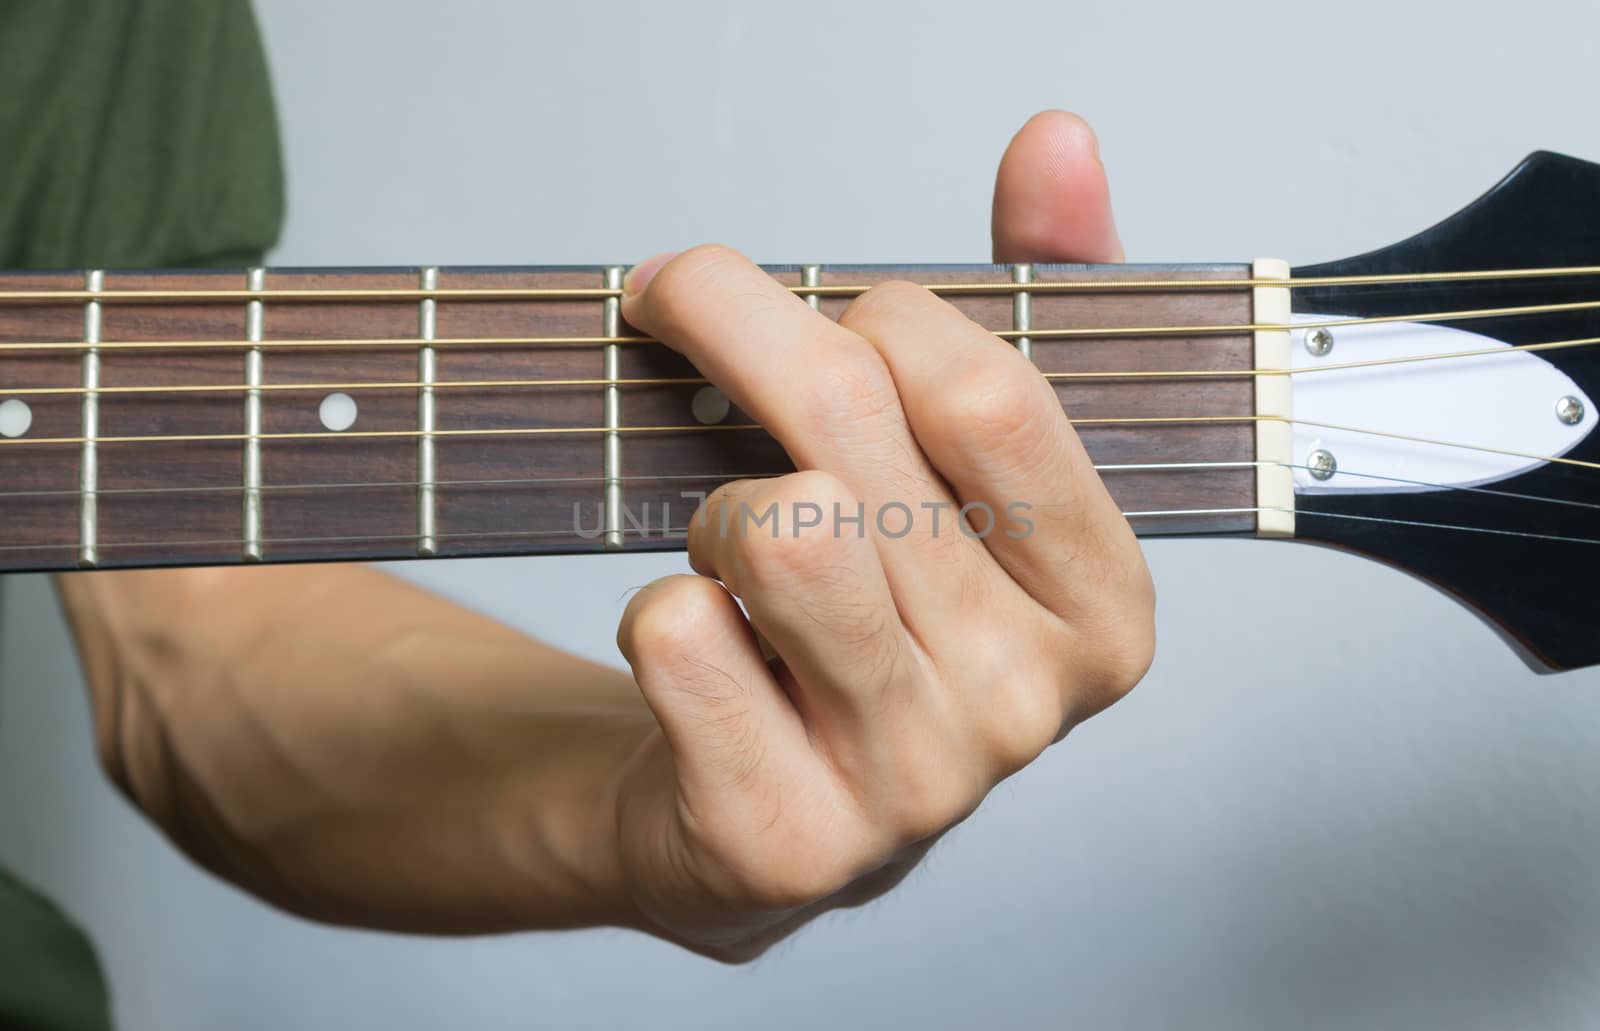 Guitar Player Hand or Musician Hand in G Major Chord on Acoustic Guitar String with soft natural light in close up view